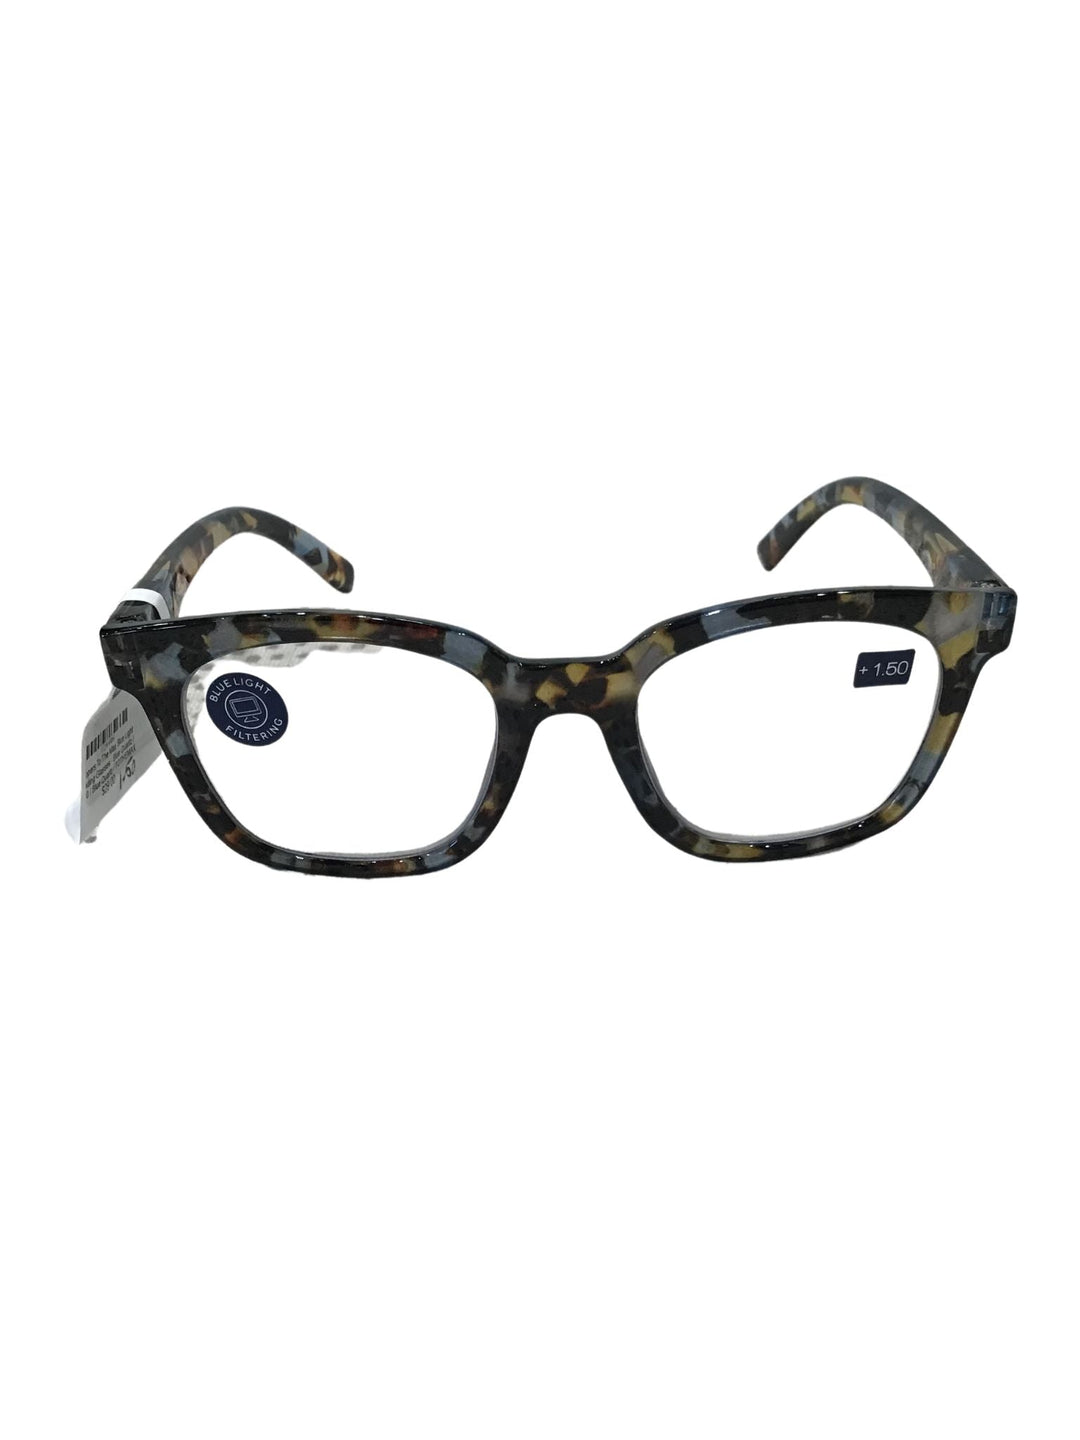 Peepers-Peepers To The Max Blue Light Reading Glasses - Blue Quartz - Leela and Lavender